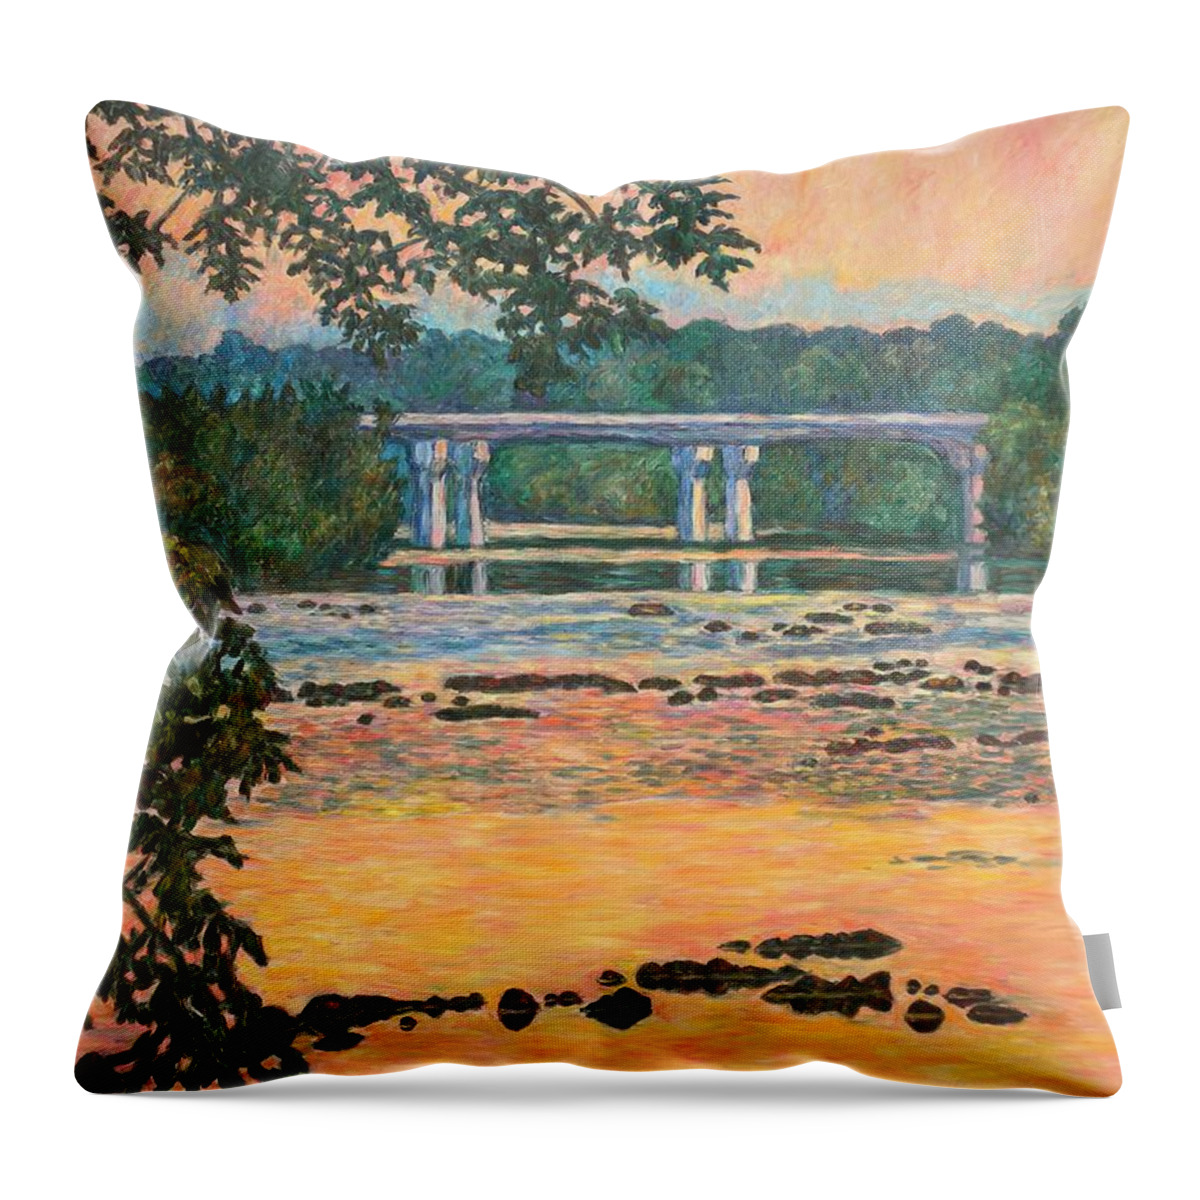 Landscape Throw Pillow featuring the painting New Memorial Bridge at Dusk by Kendall Kessler